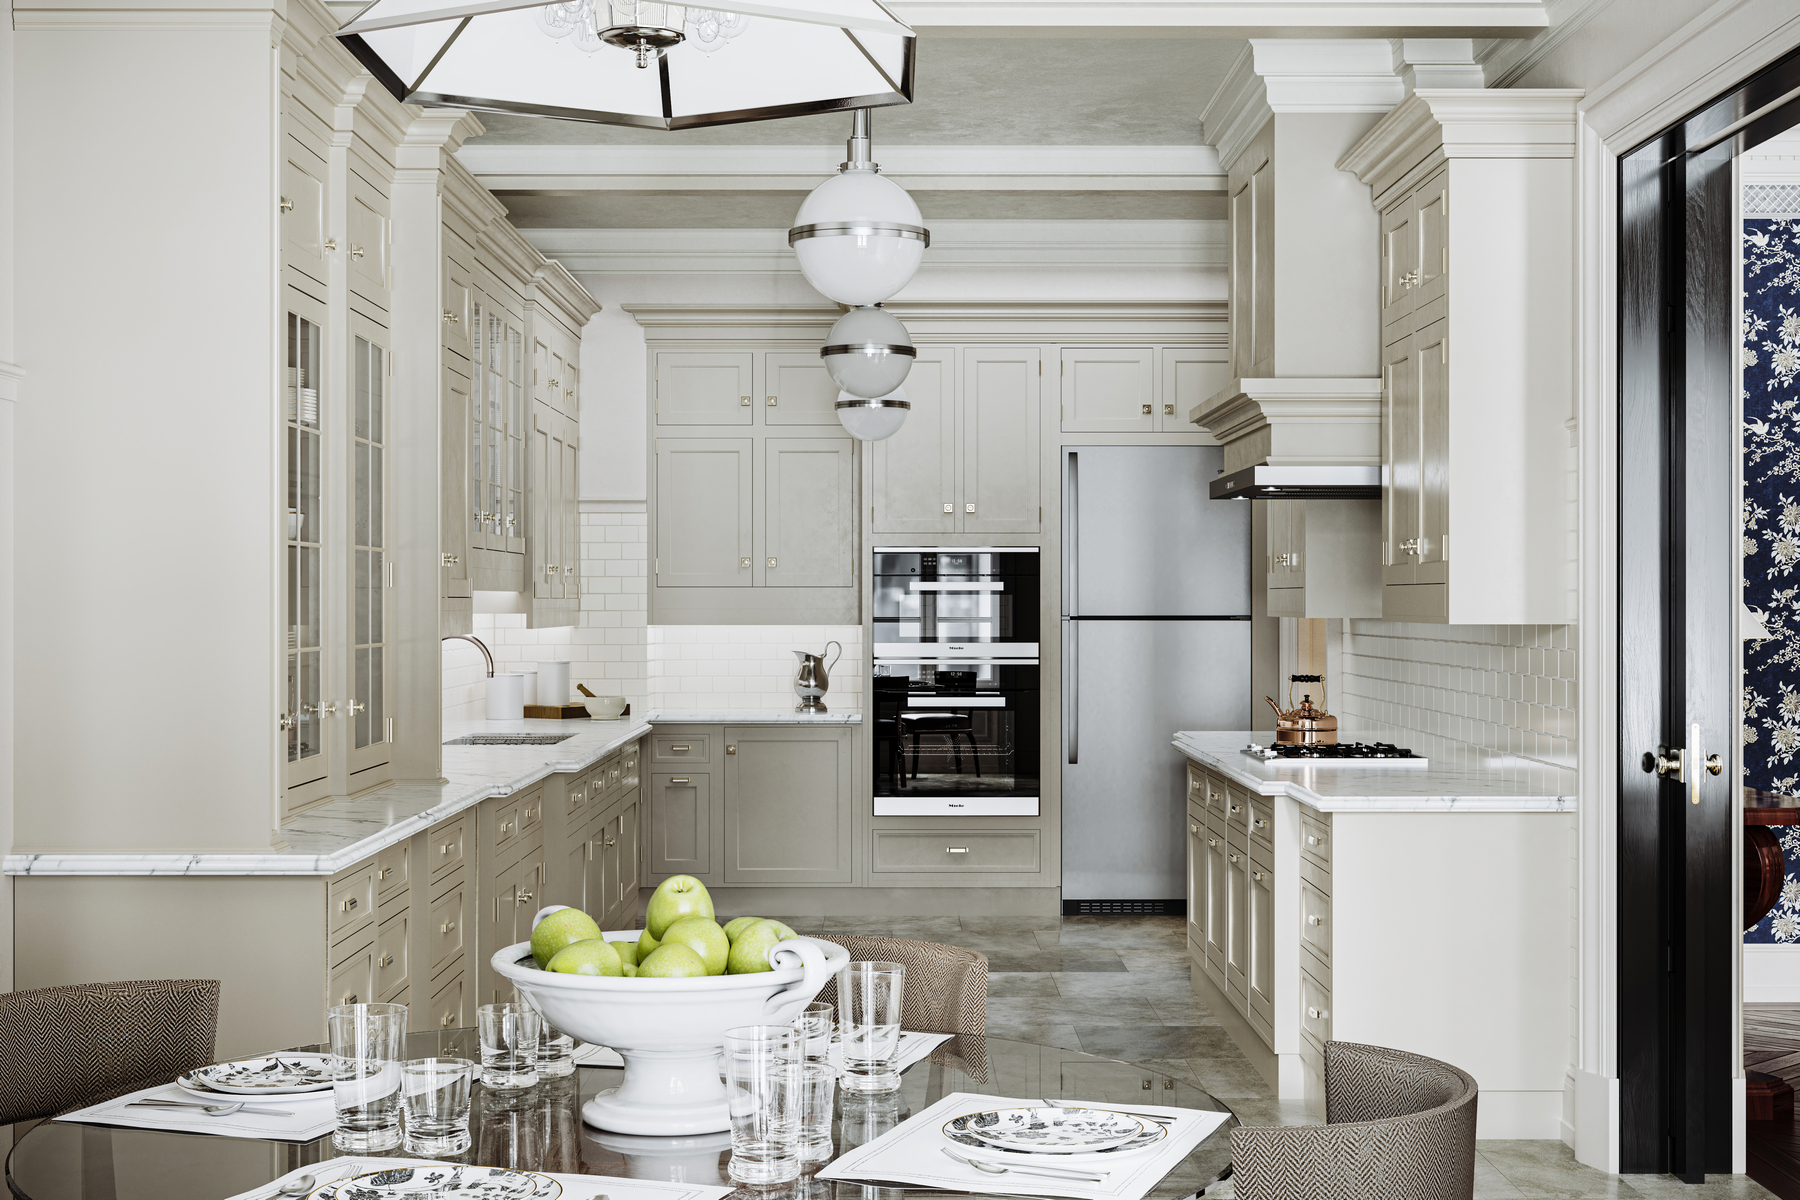 Classic Style Kitchens For Ralph Lauren Home, London - , 2